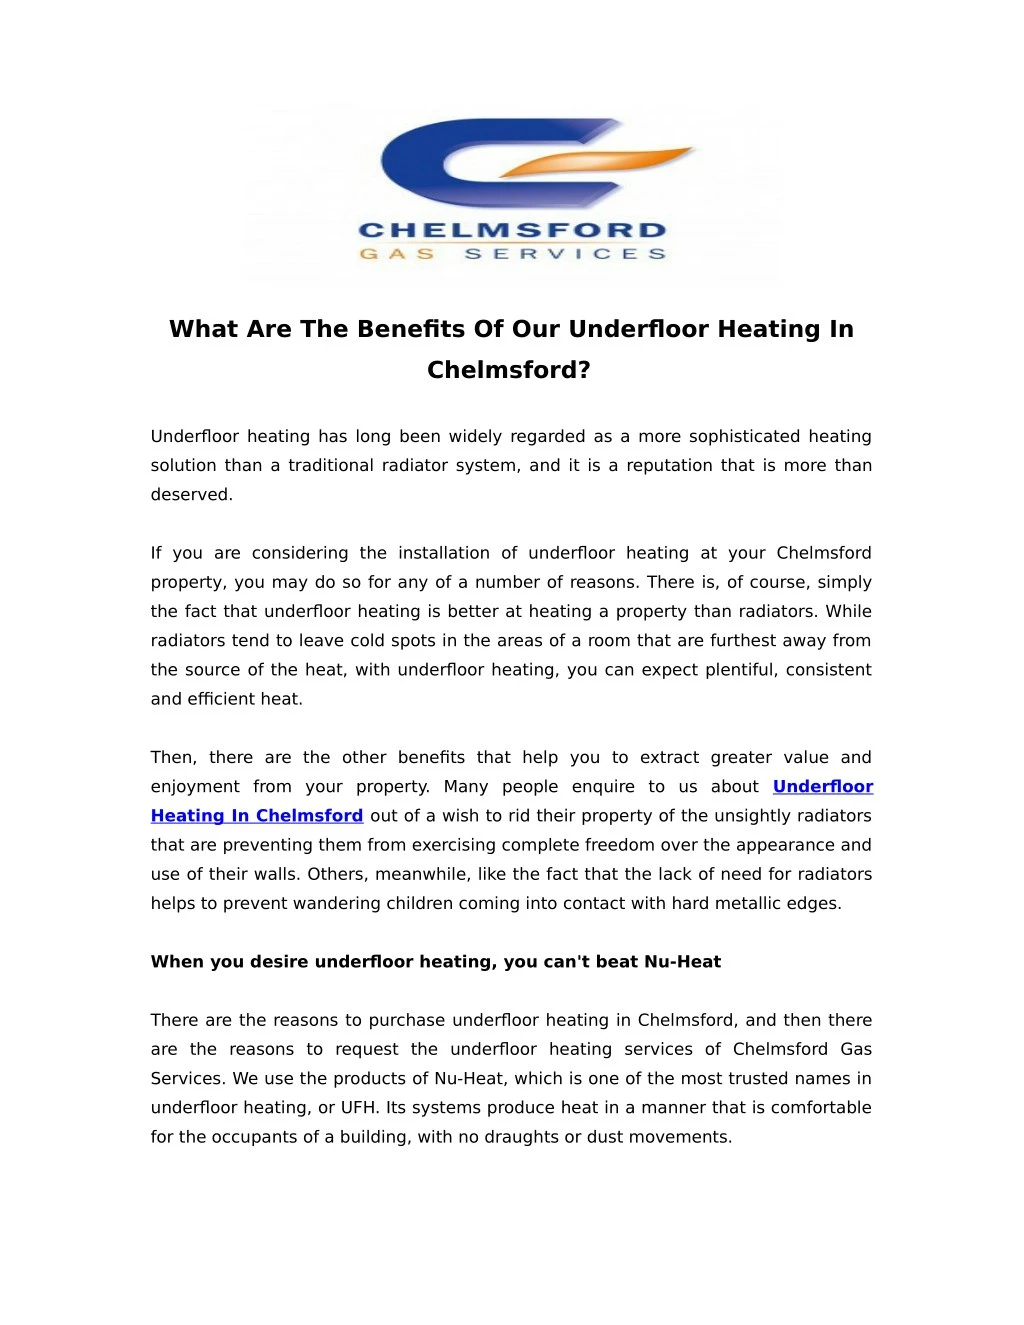 what are the benefits of our underfloor heating in